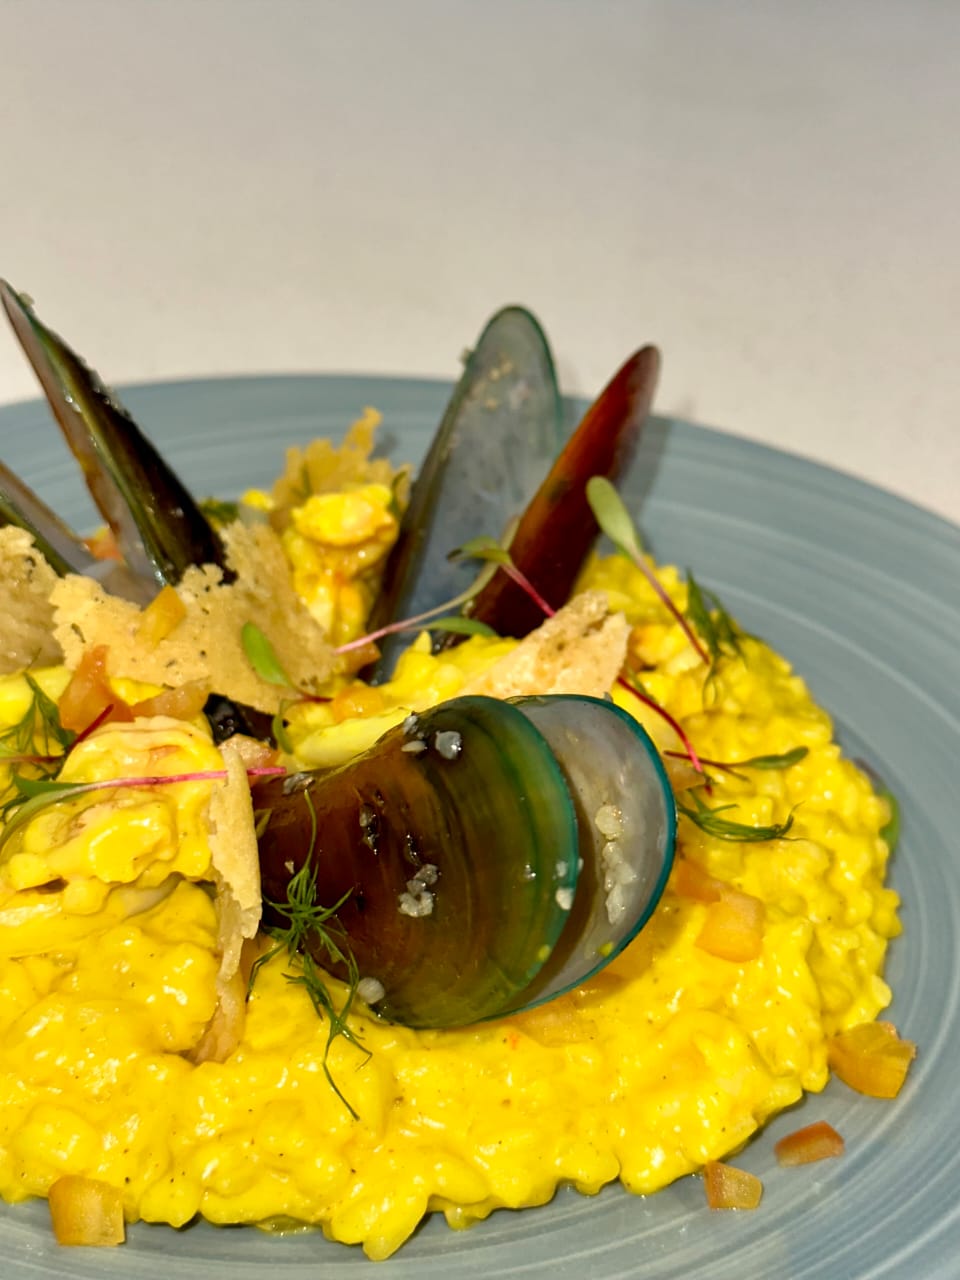 C:\Users\GCPI-ROBBY\Desktop\PRS\STACIA\UPDATED PHOTOS\4. Saffron Seafood Risotto .jpg